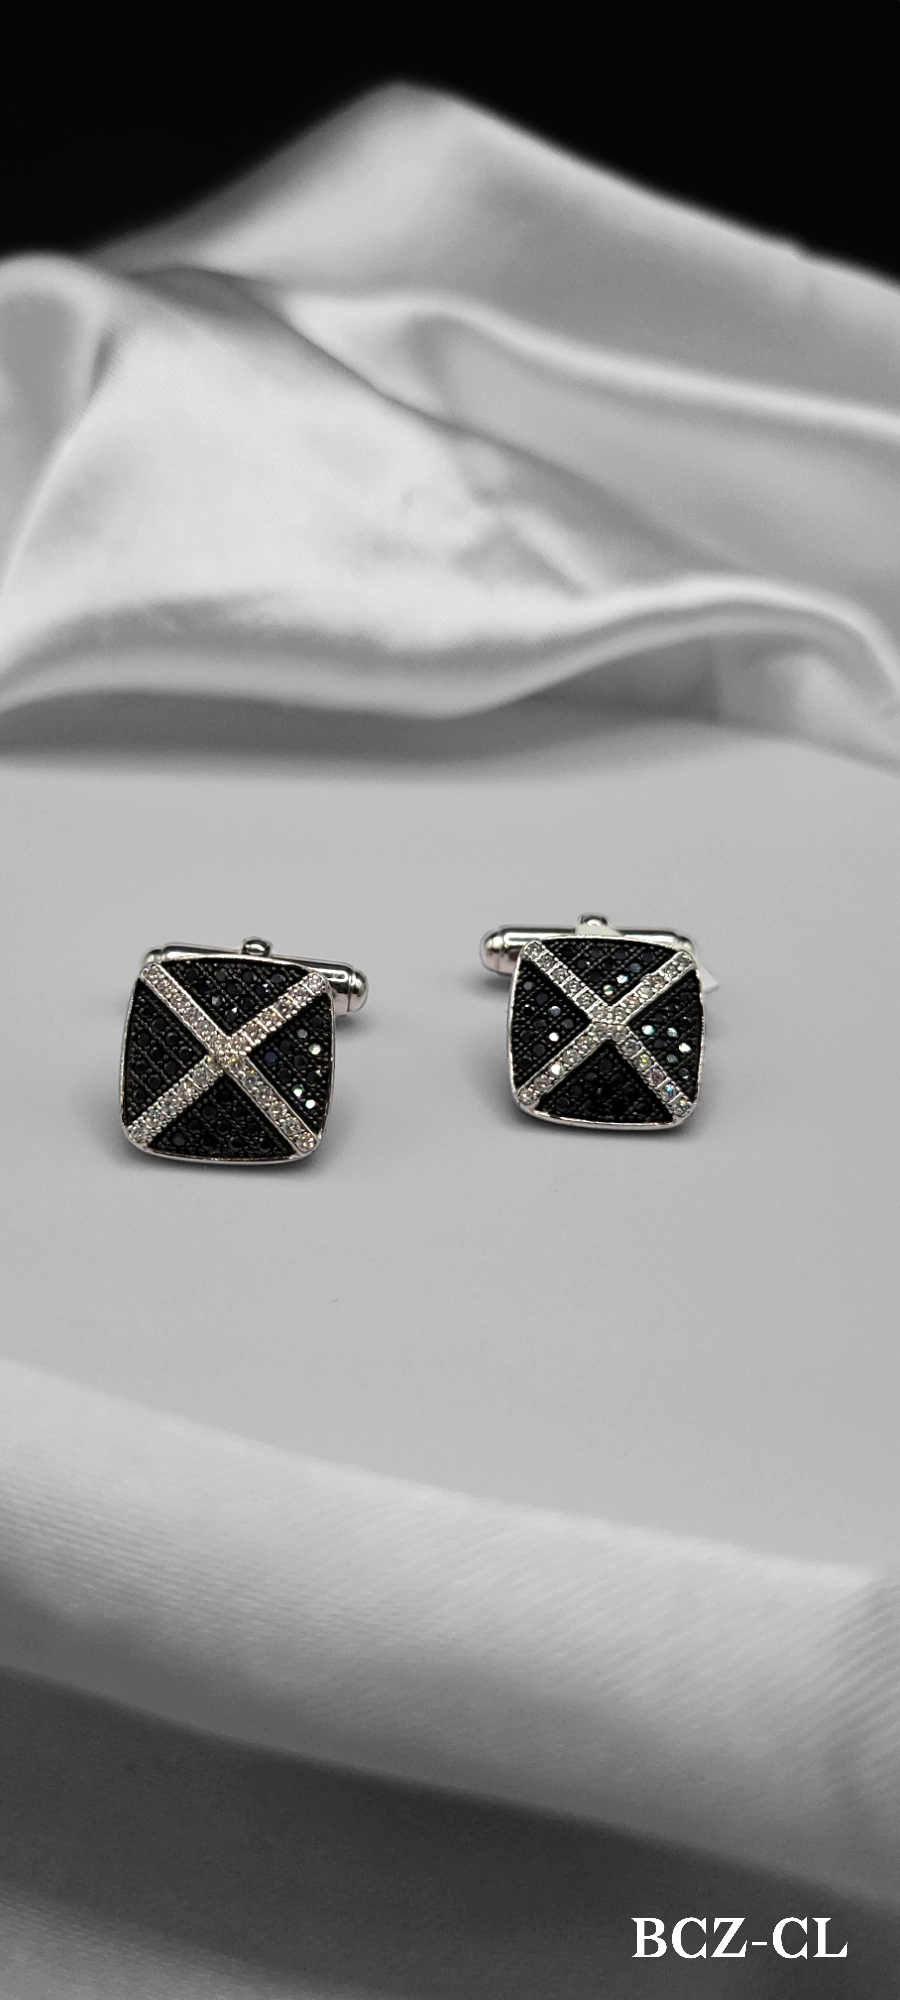 BLACK CUBIC ZIRCONIA STONE CUFF LINKS ON STERLING SILVER. DRAMATIC STATEMENT PIECE! KNOWN AS THE STONE OF PRACTICALITY.